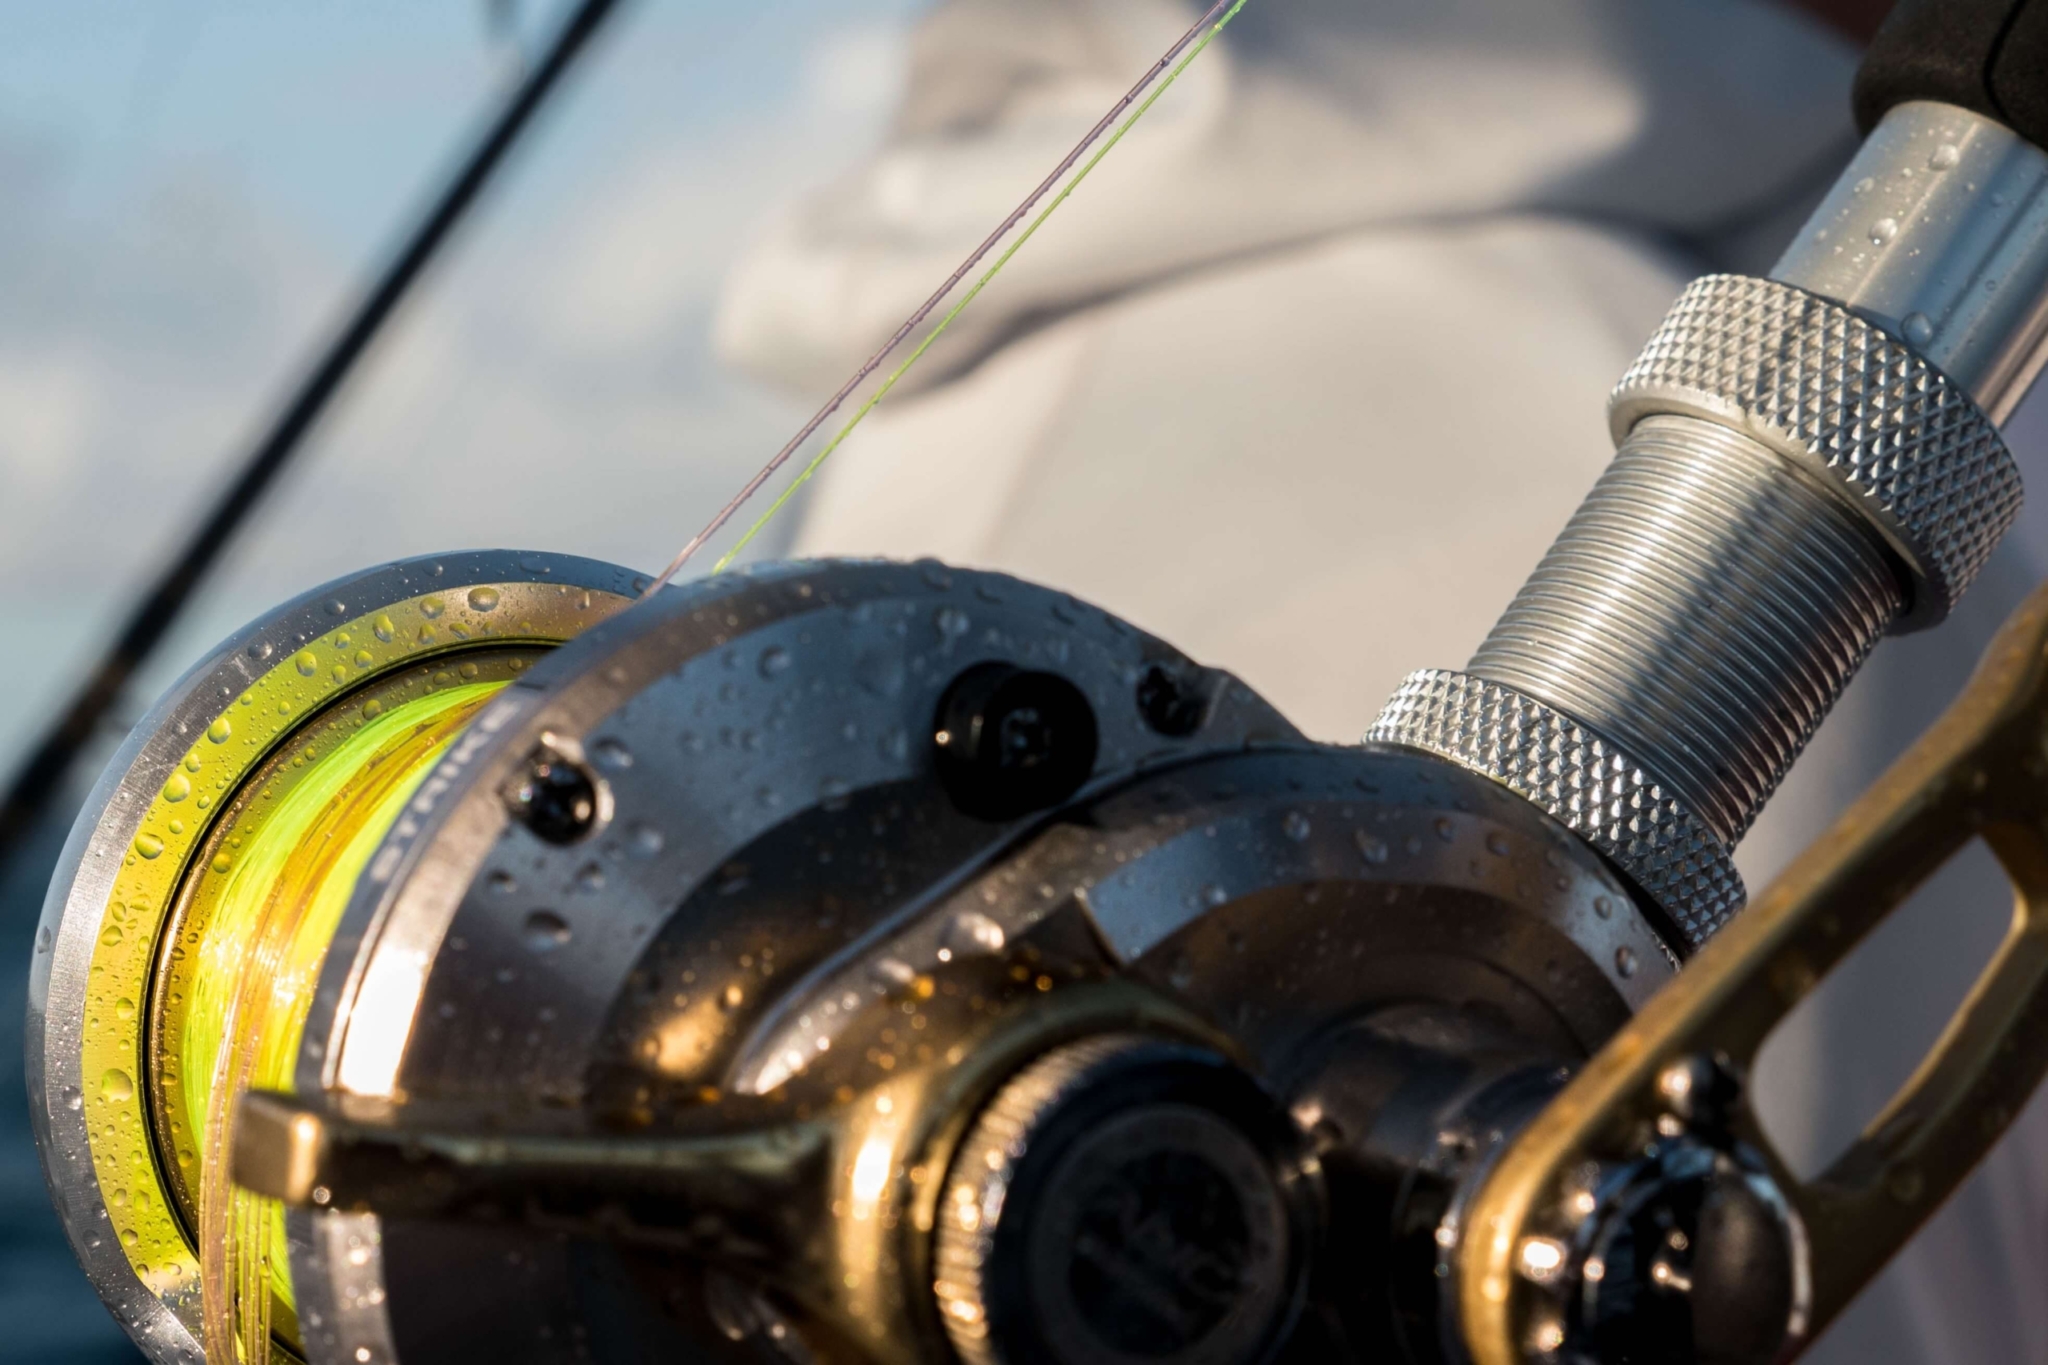 Alaska Fishing Lodges: A close up view of a large saltwater fishing reel.